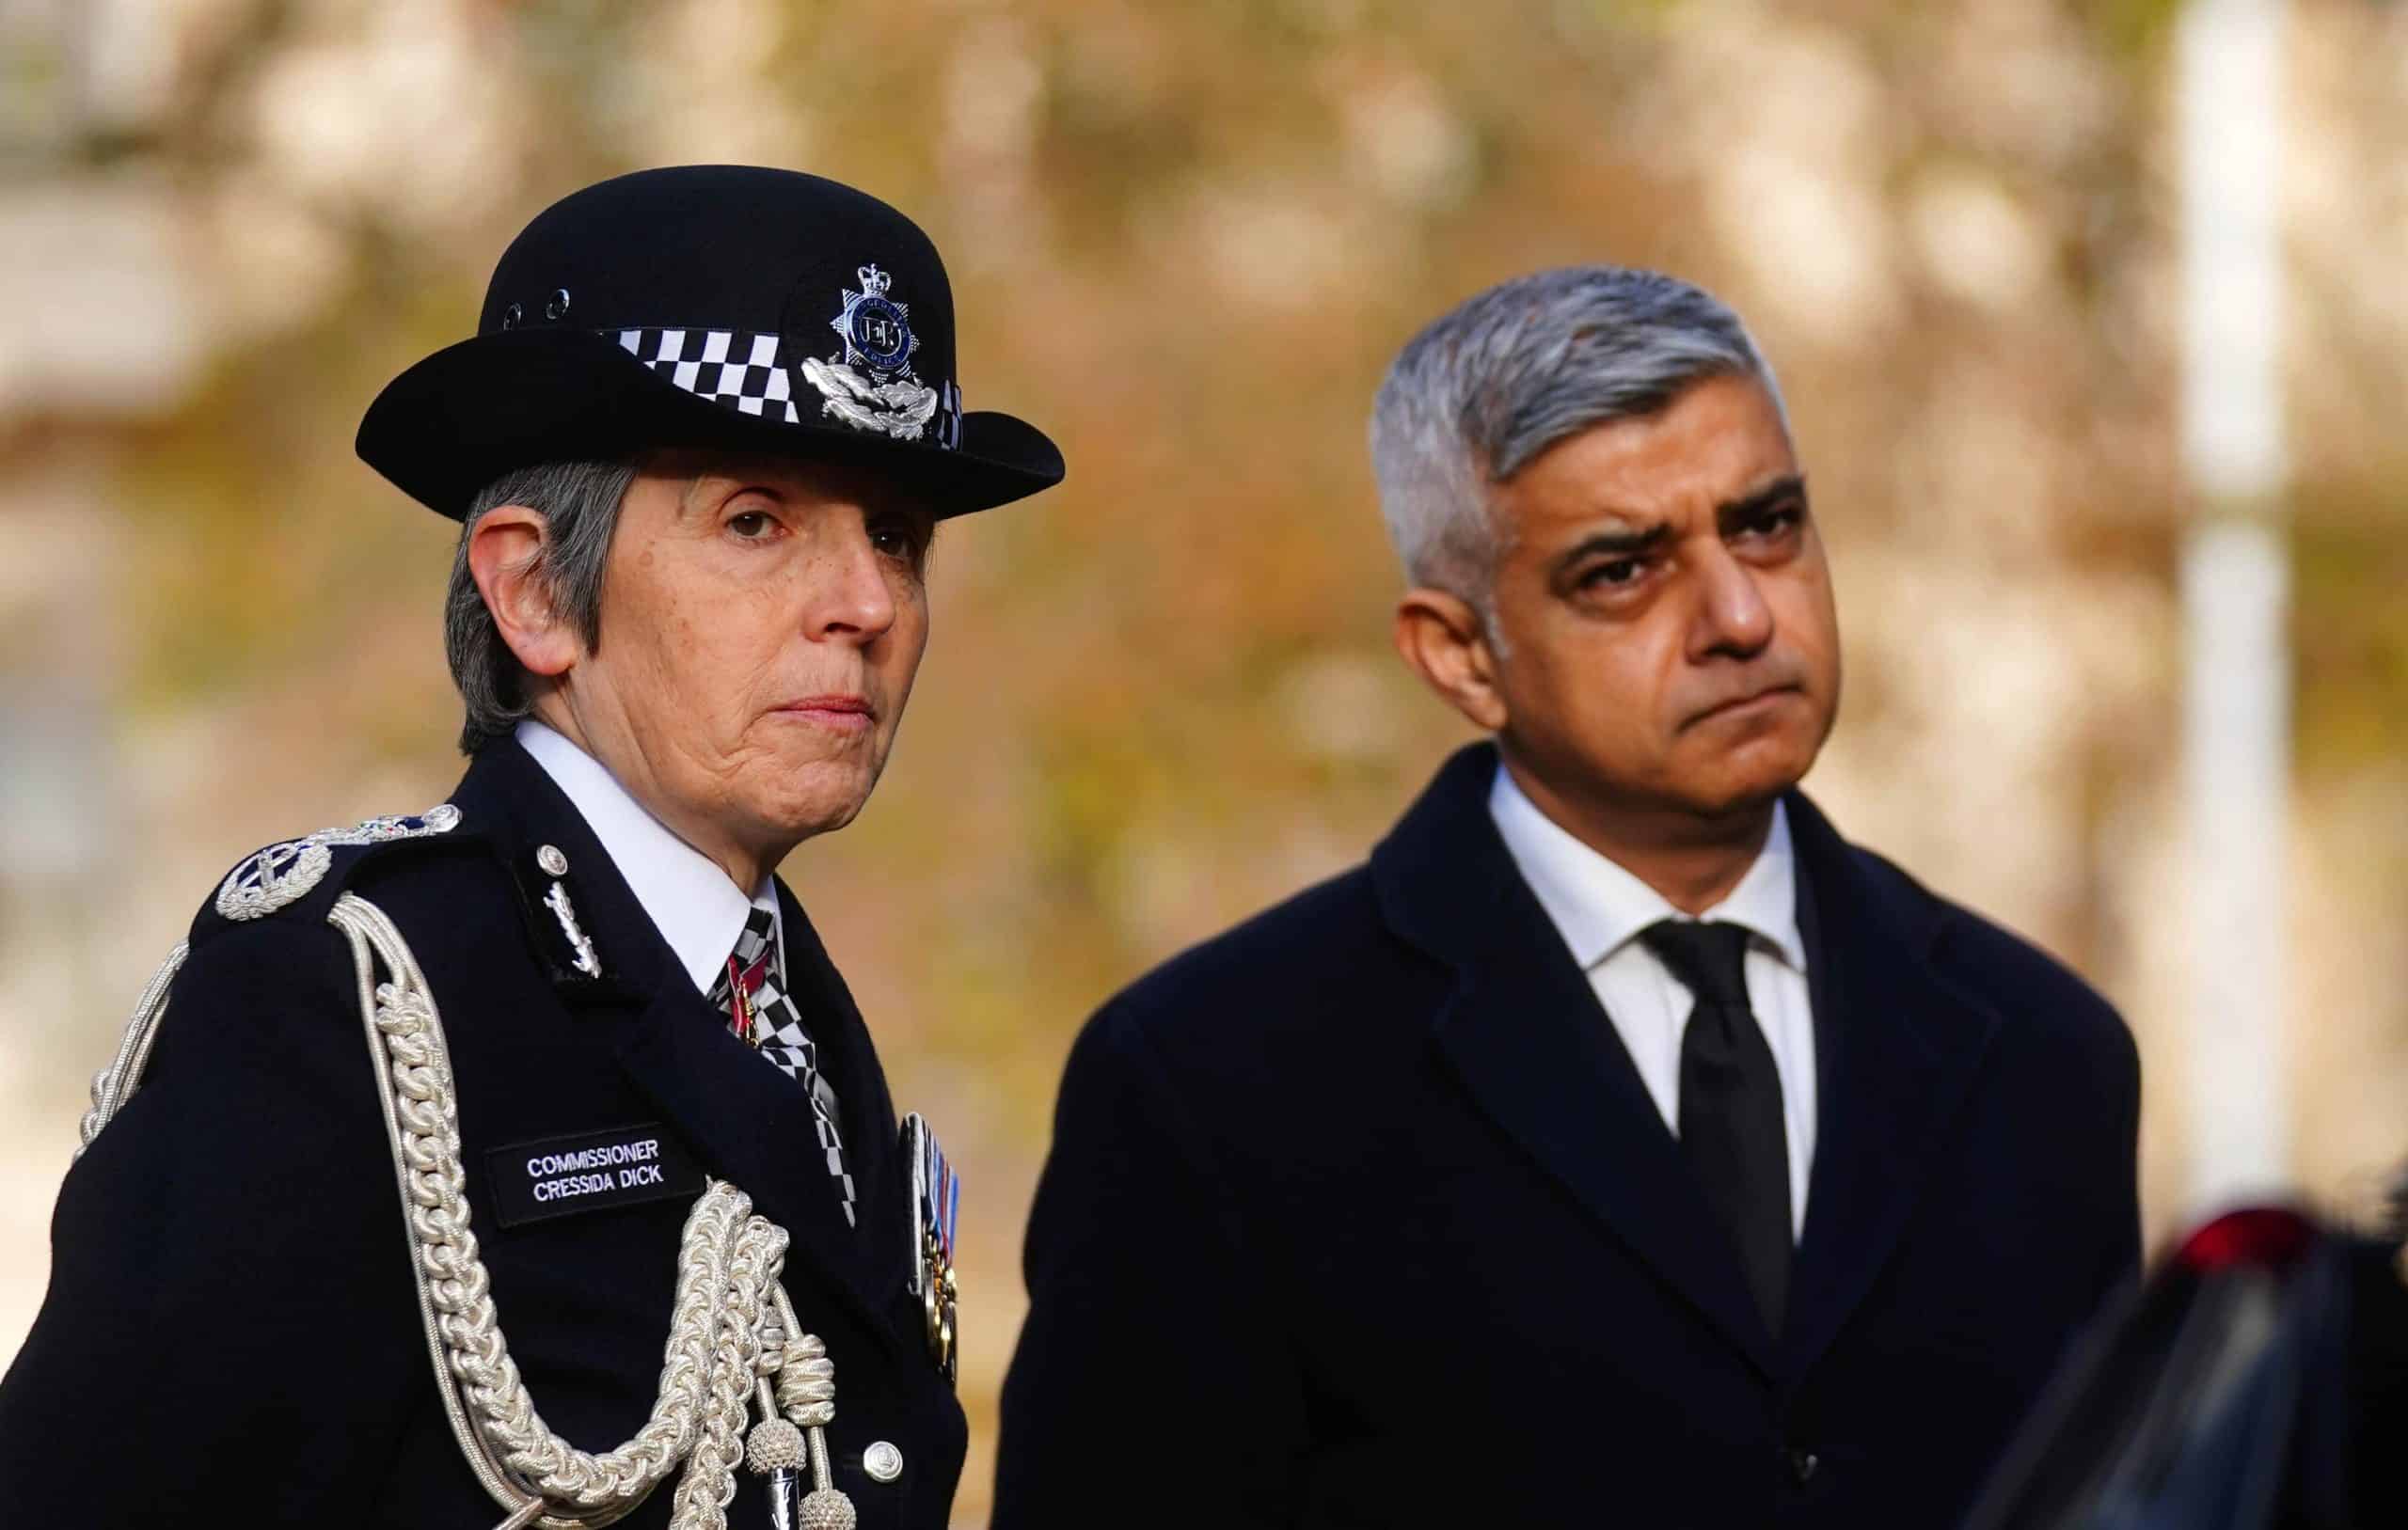 Metropolitan Police ‘refuses to admit it is institutionally racist’